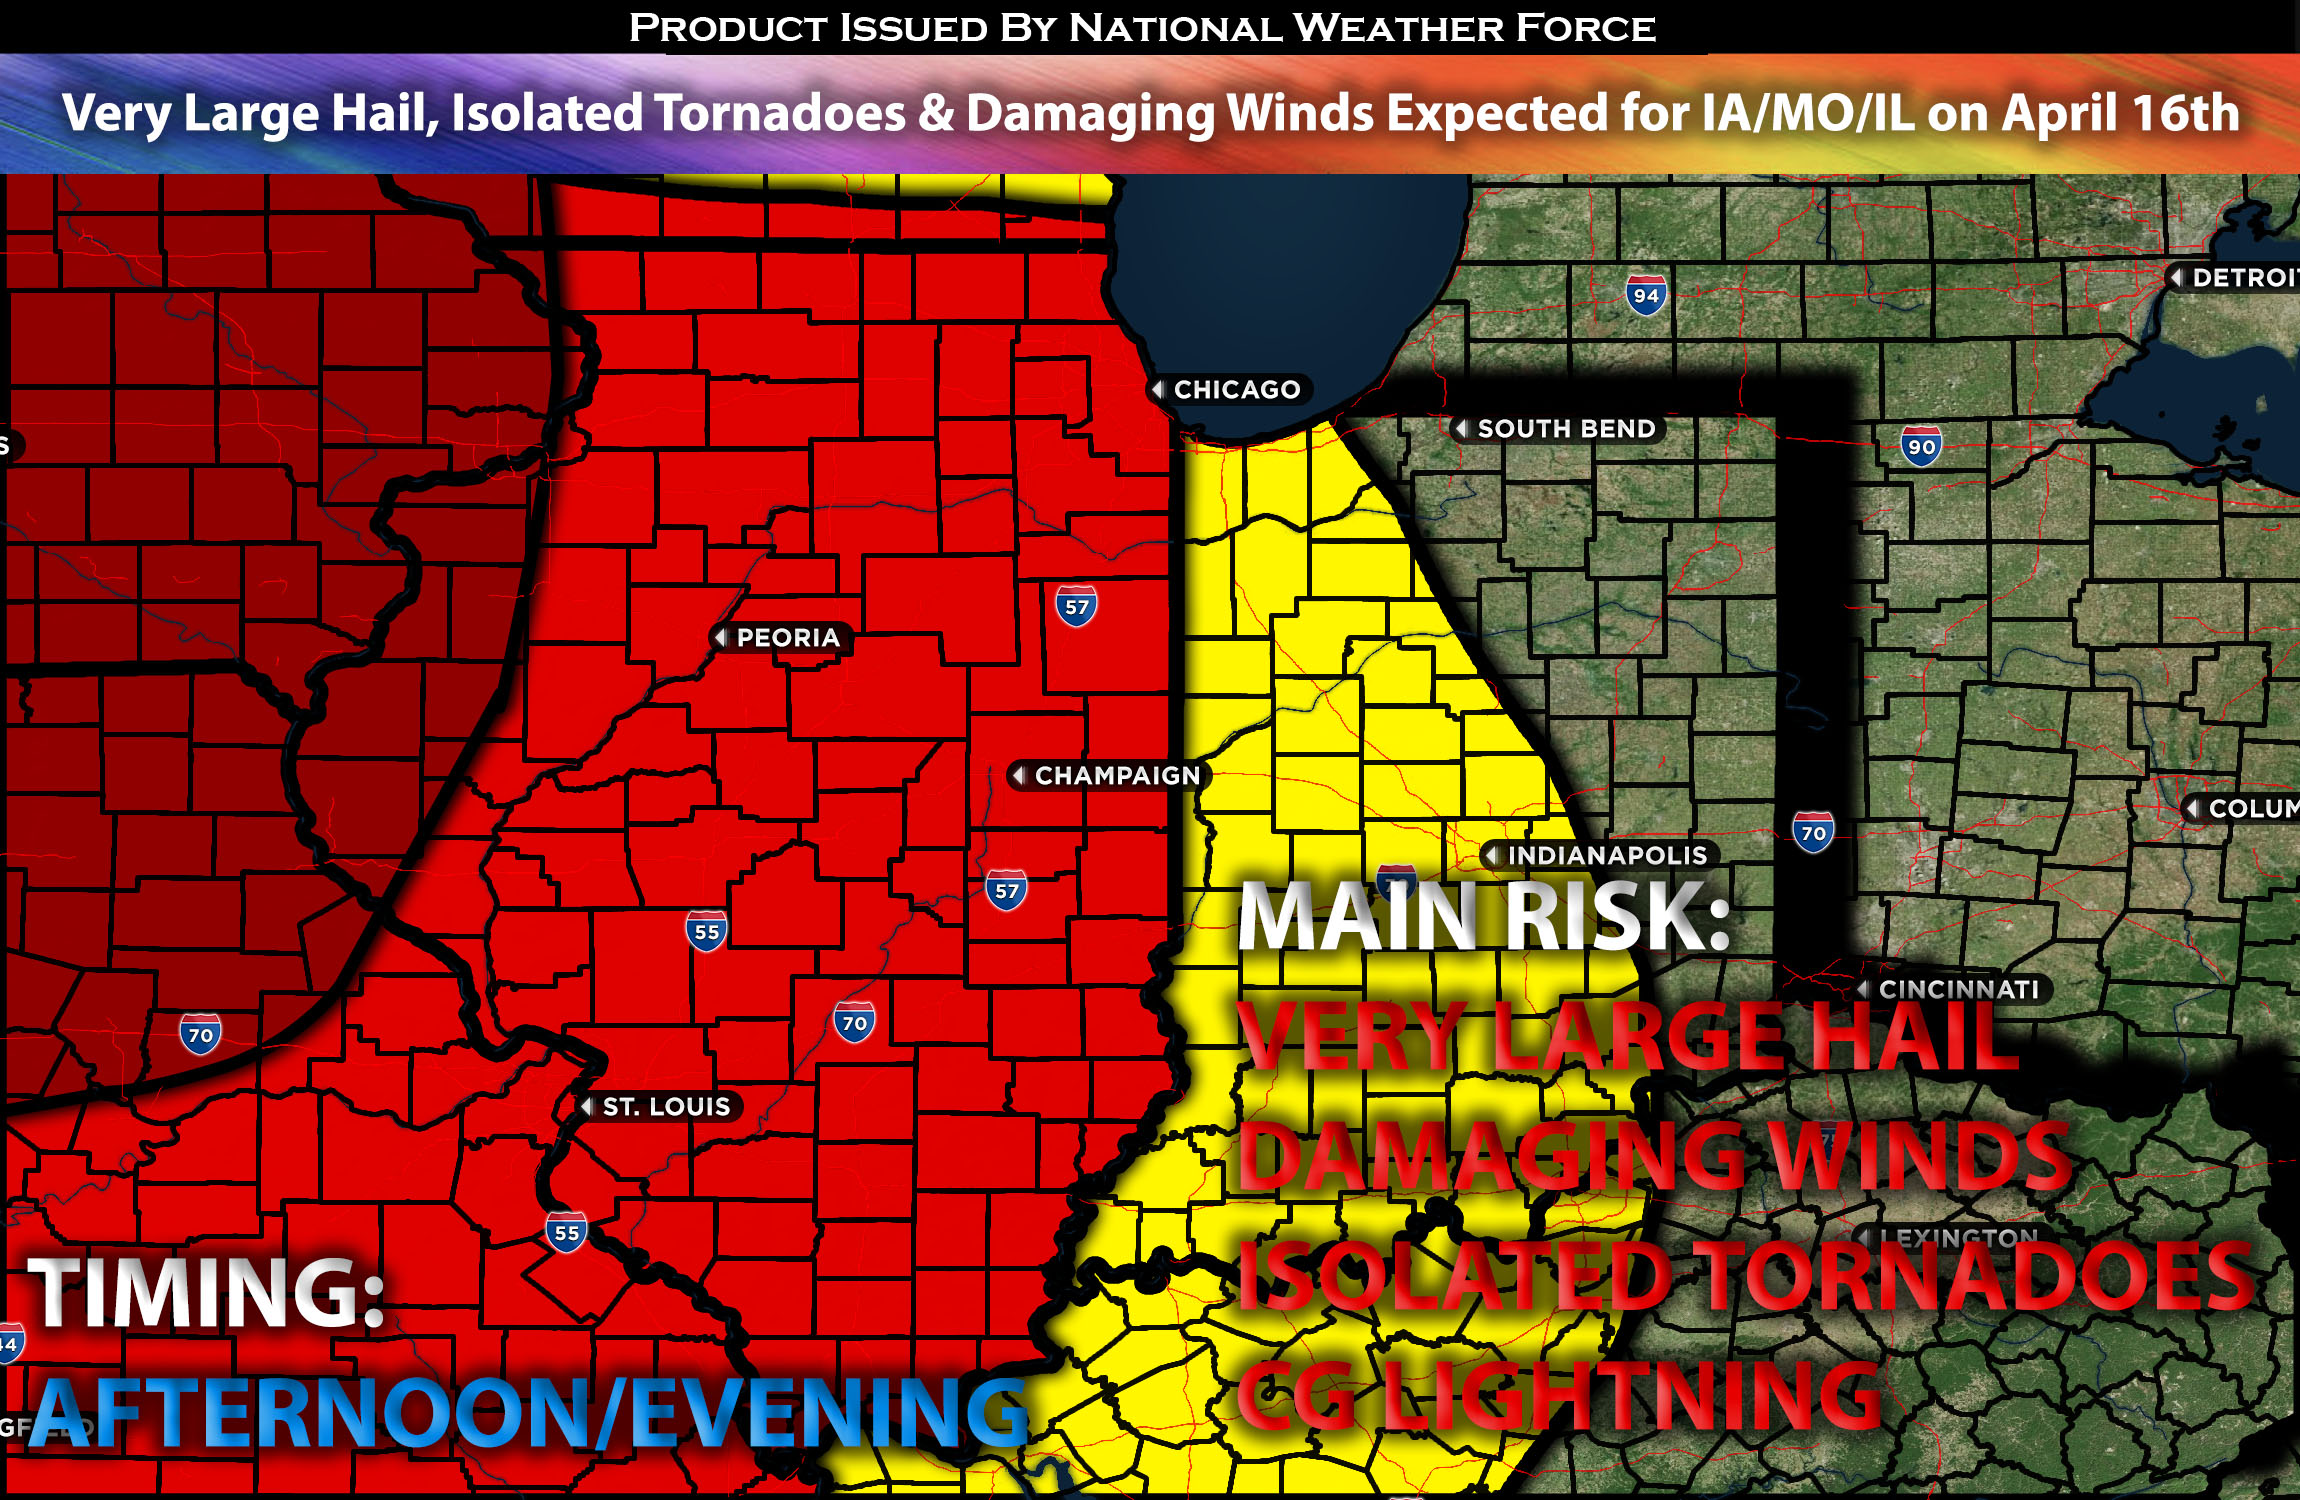 Very Large Hail, Isolated Tornadoes & Damaging Winds Expected for IA/MO/IL on April 16th